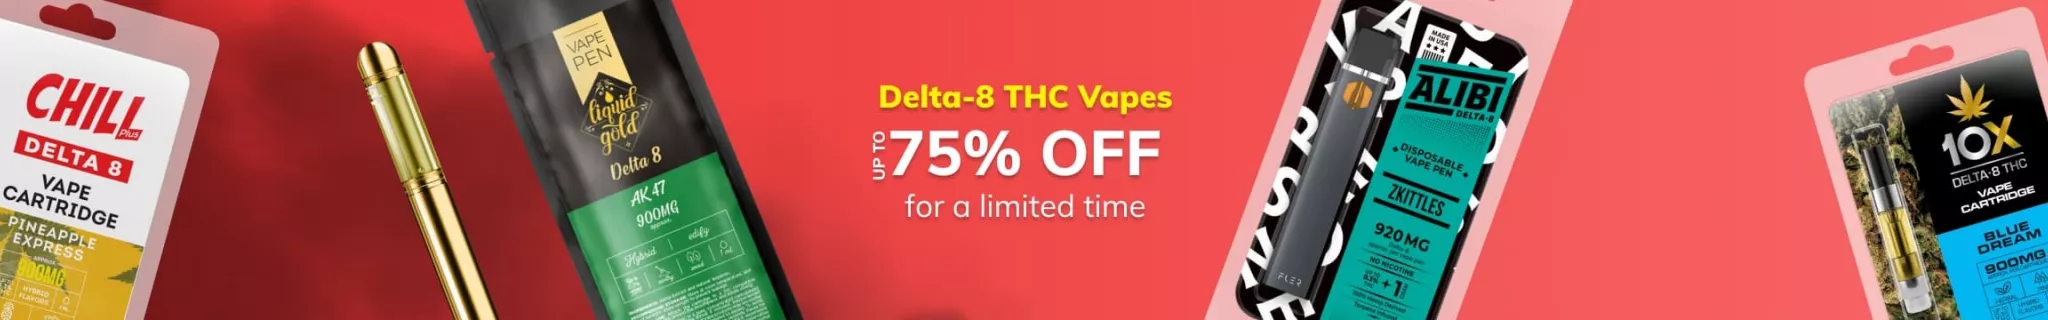 oCollection Banner - Mixed Categories - Delta-8 THC Vapes up to 75% OFF Retail